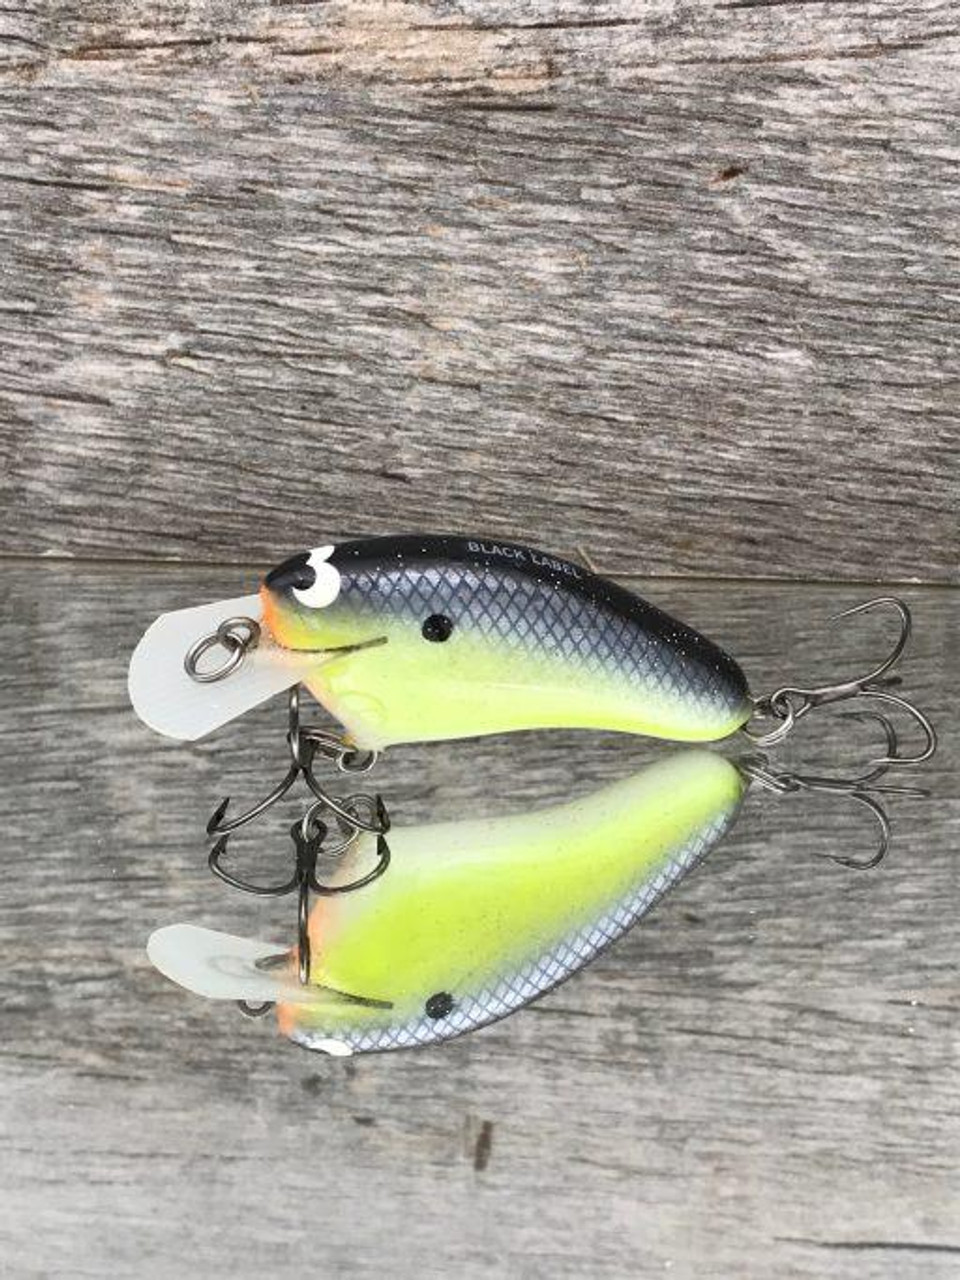 https://cdn11.bigcommerce.com/s-0xmhwue6/images/stencil/1280x1280/products/22627/49911/BLACK-LABEL-HICKSTER-GIZZARD-SHAD-FOIL-063272115070_image1__68942.1667939990.jpg?c=2